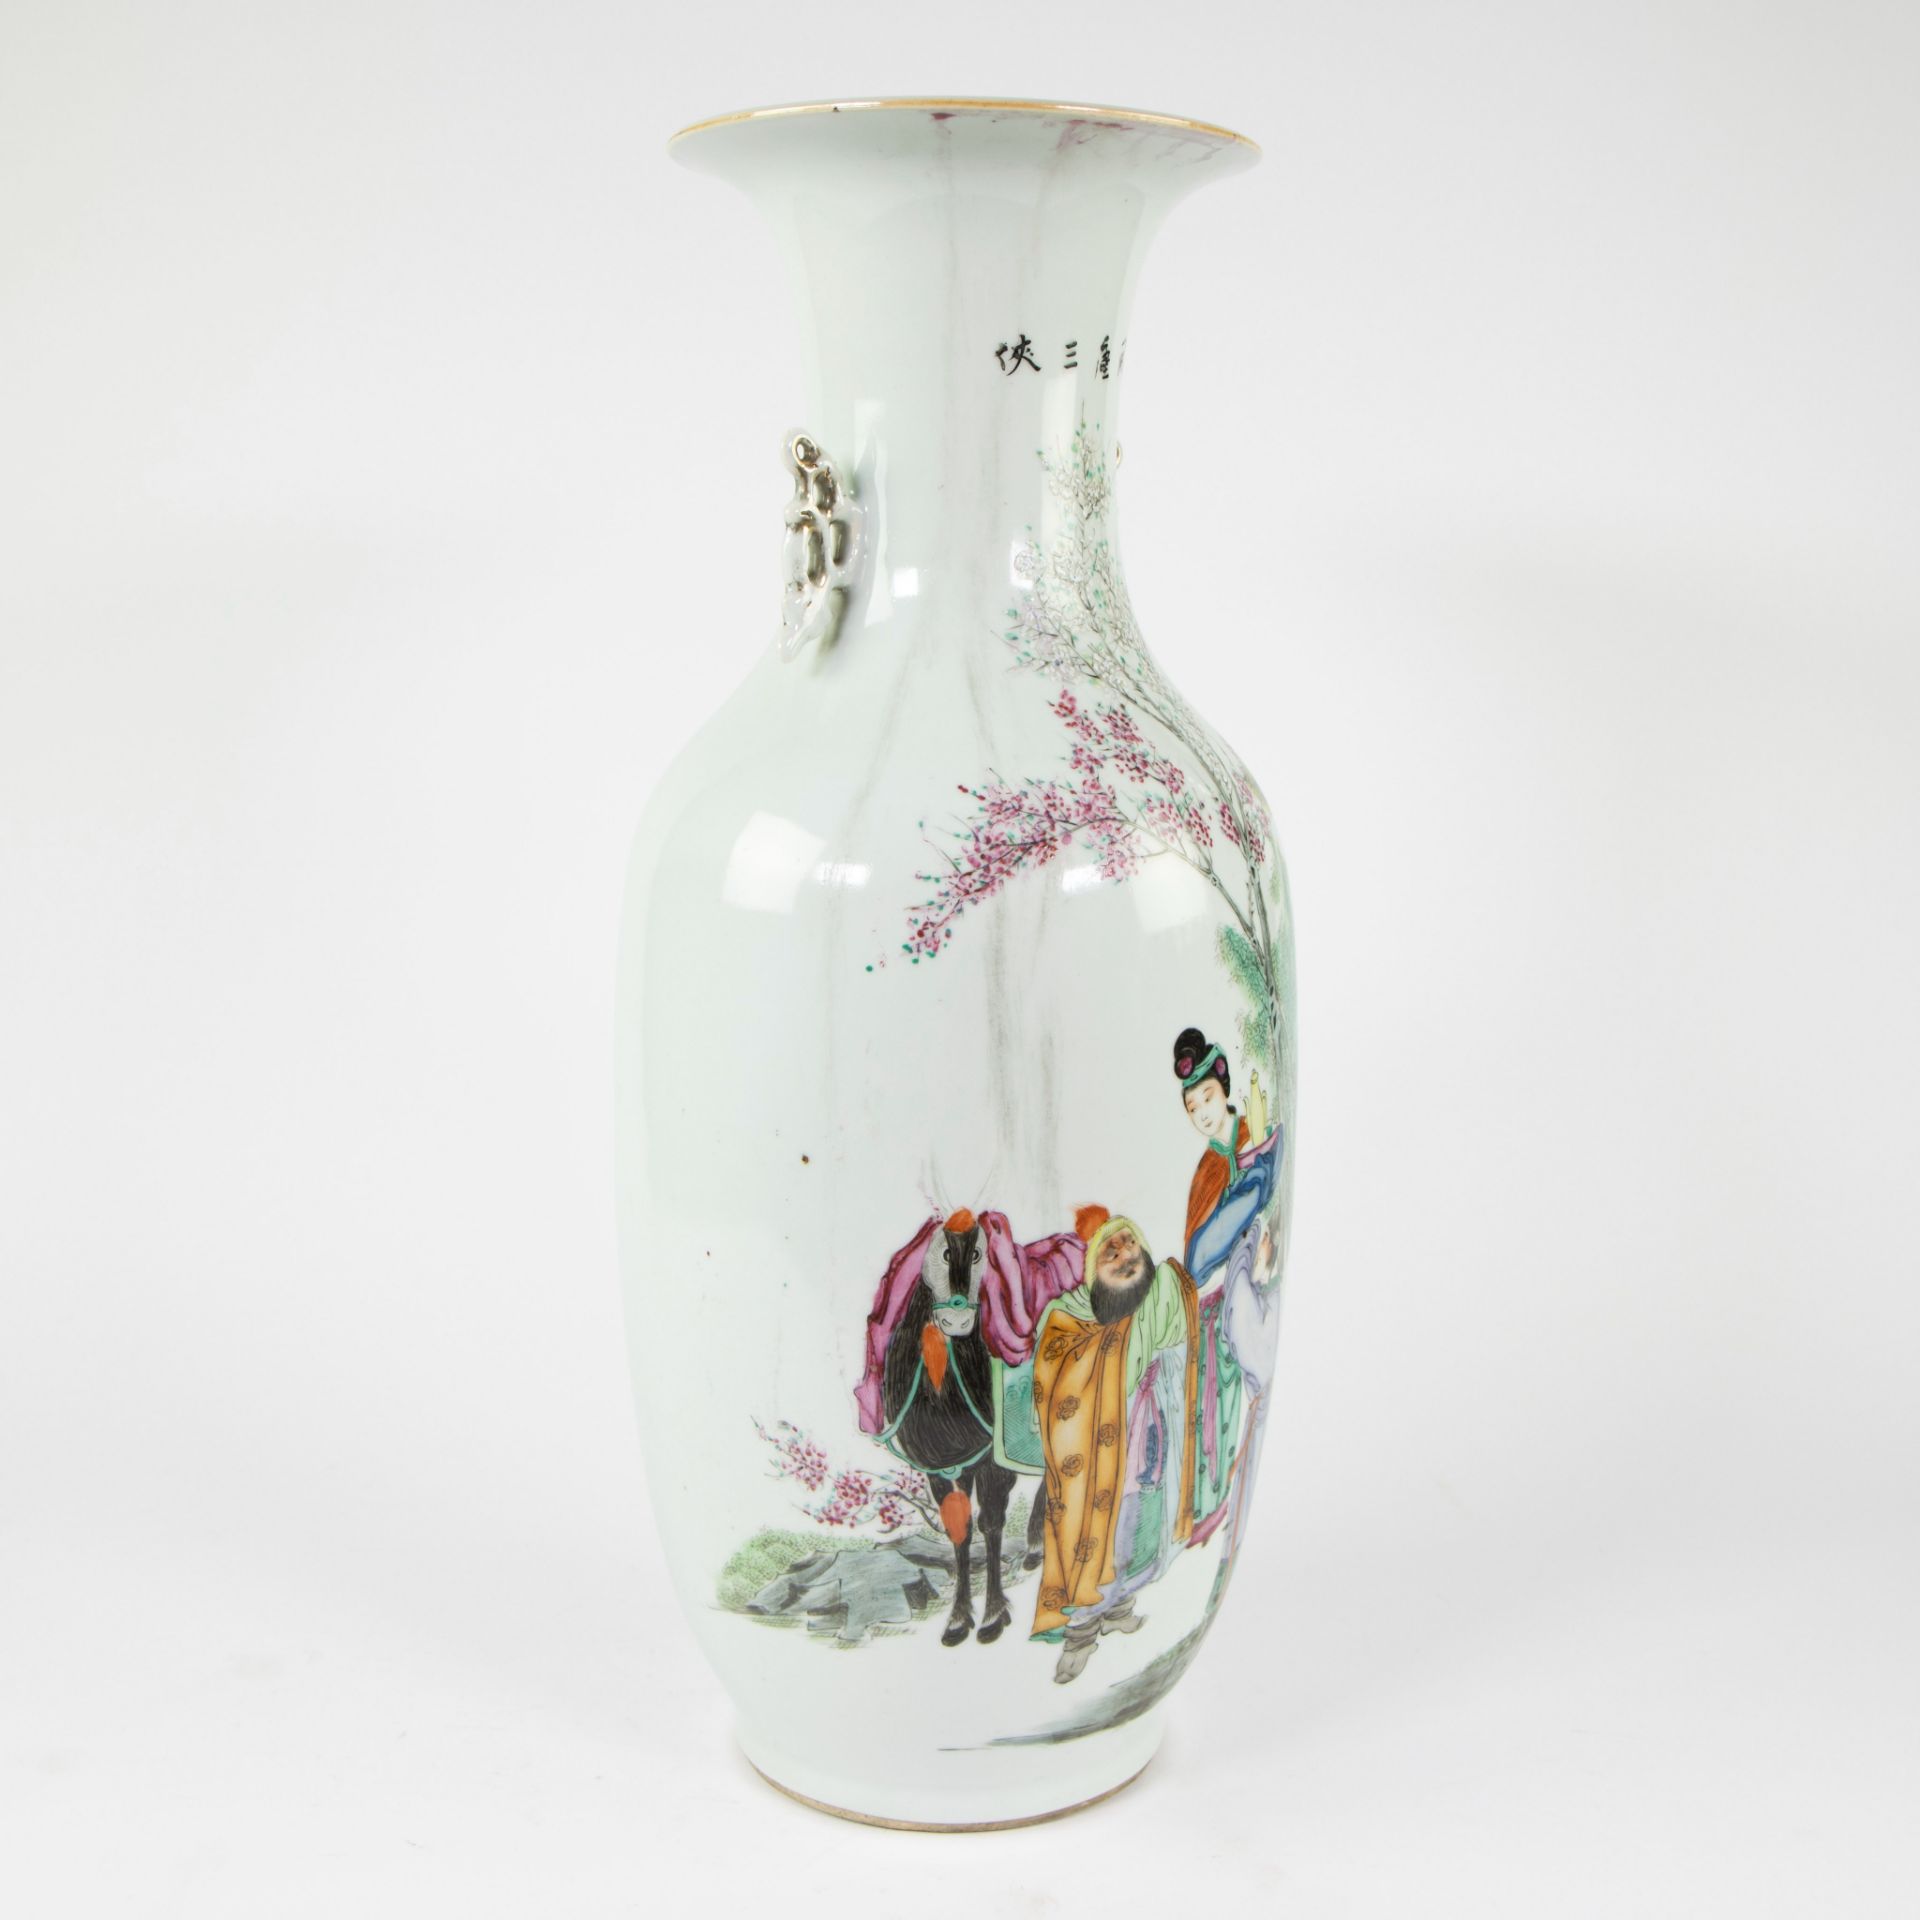 19th century Chinese famille rose vase decorated with figures and Chinese texts - Image 9 of 11